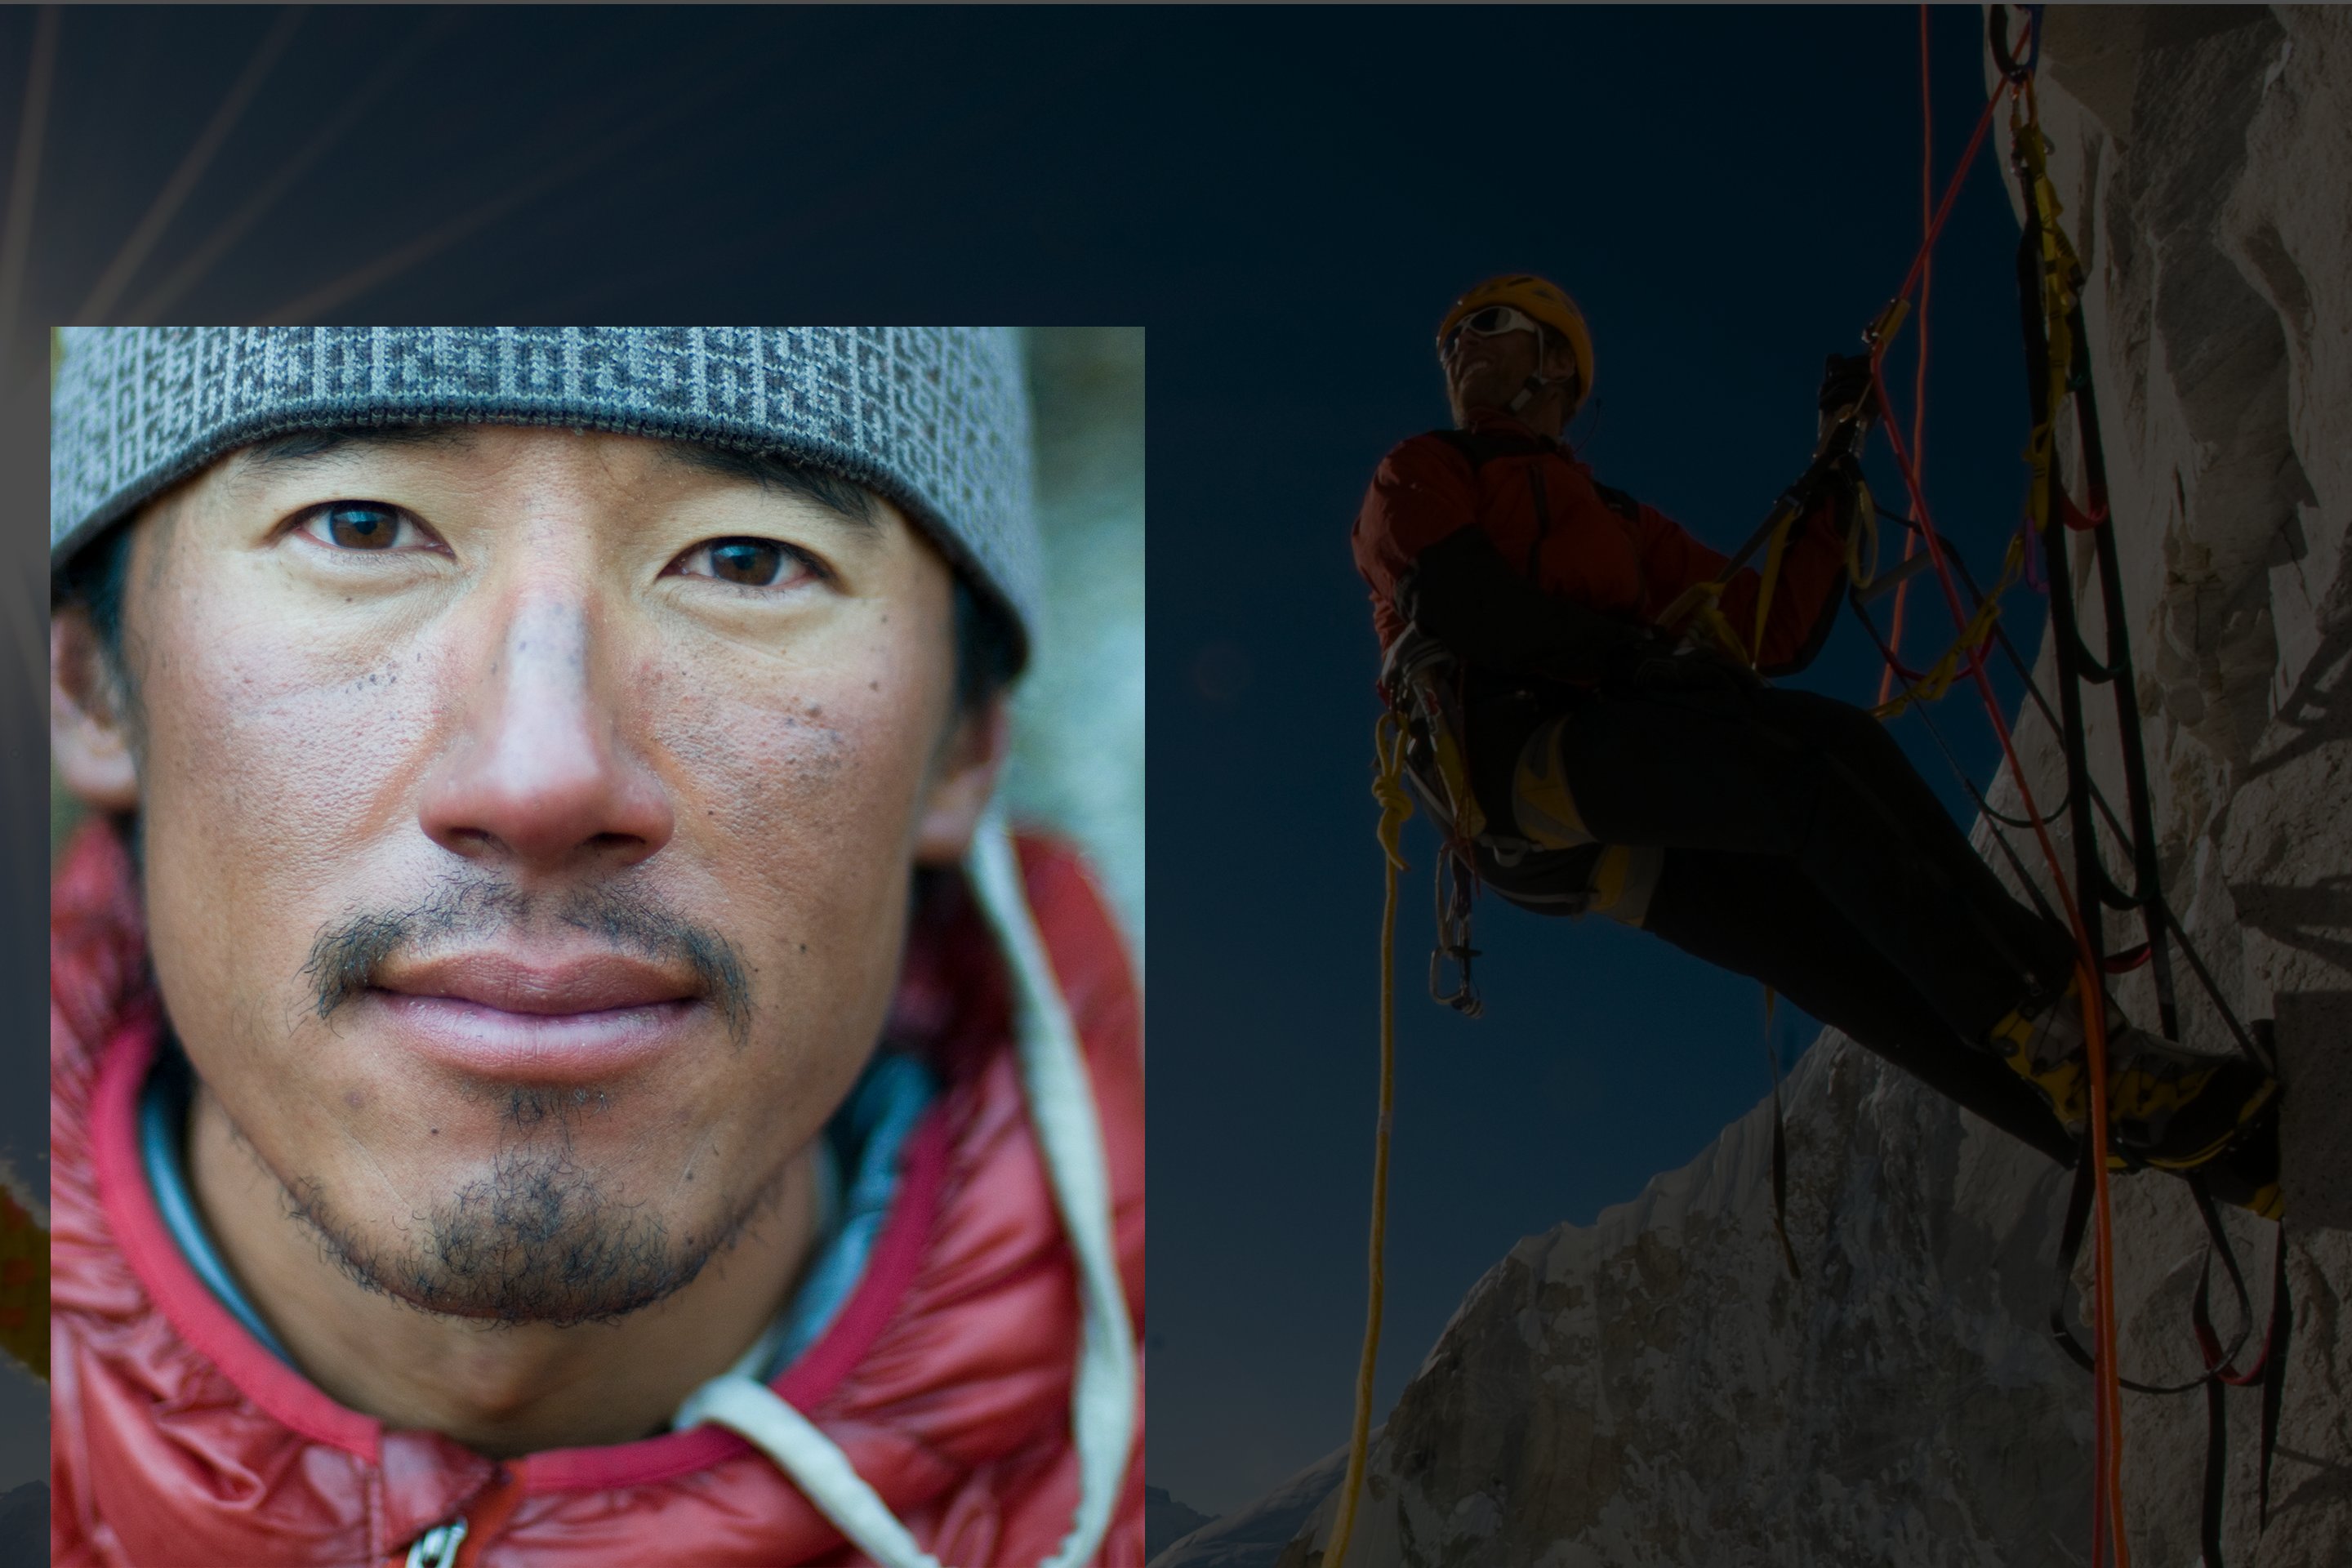 The North Face is renaming its fleece jackets and spotlighting the Sherpa  people